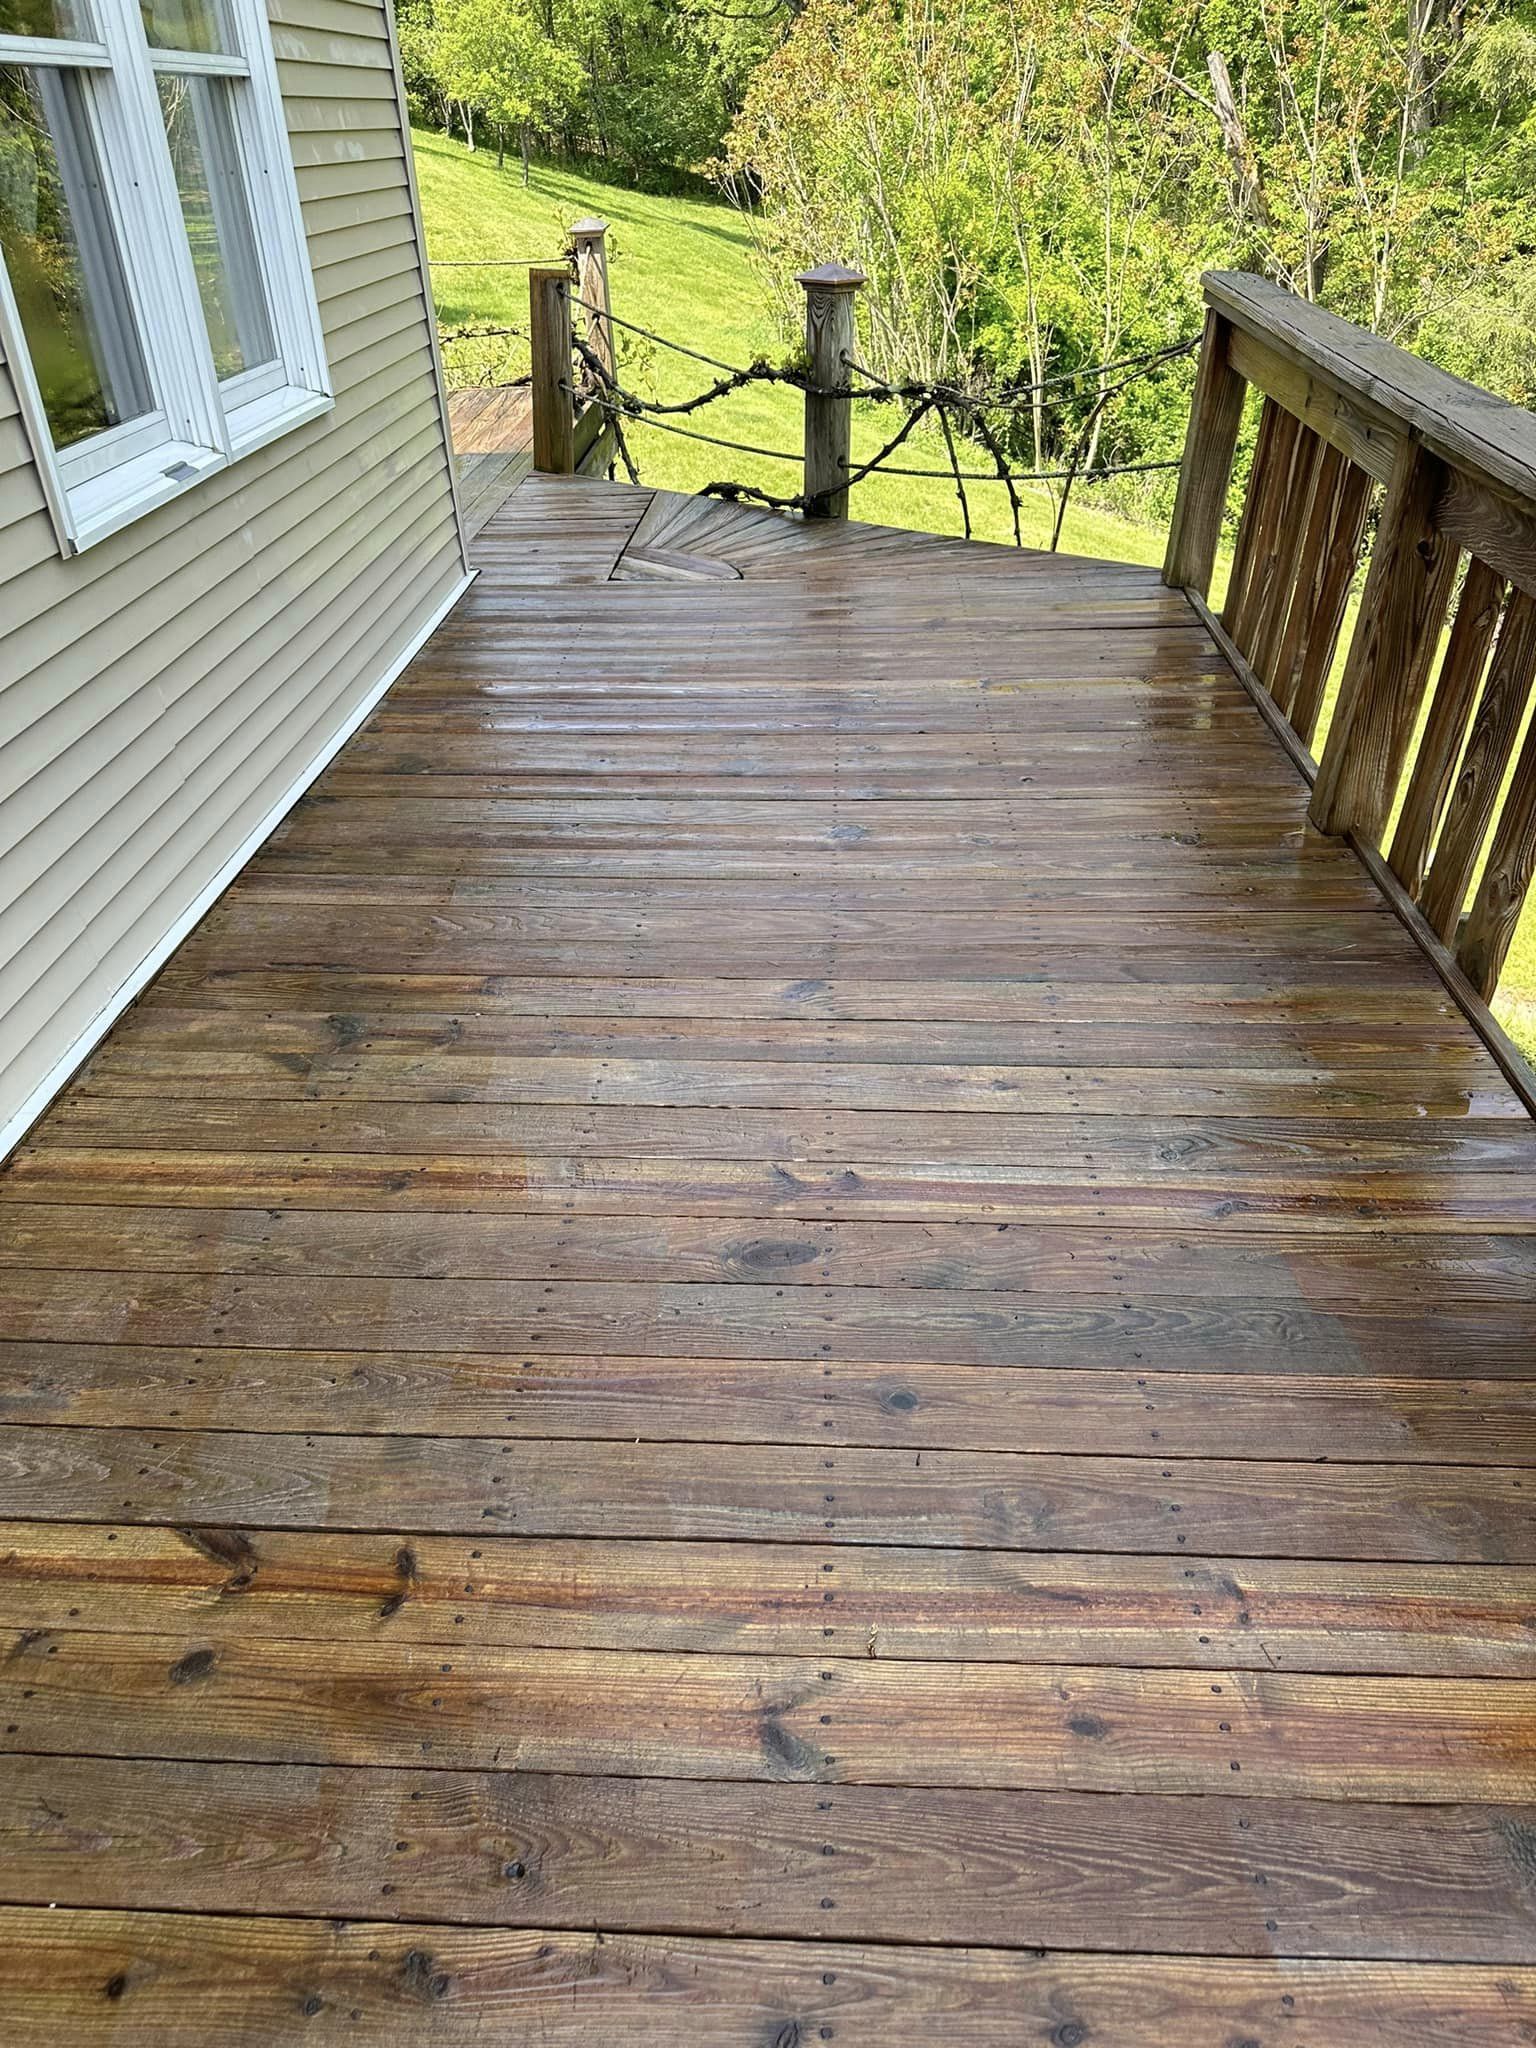 Expert pressure washing services for fence and deck cleaning in Danville PA by NextGen Power Wash LLC